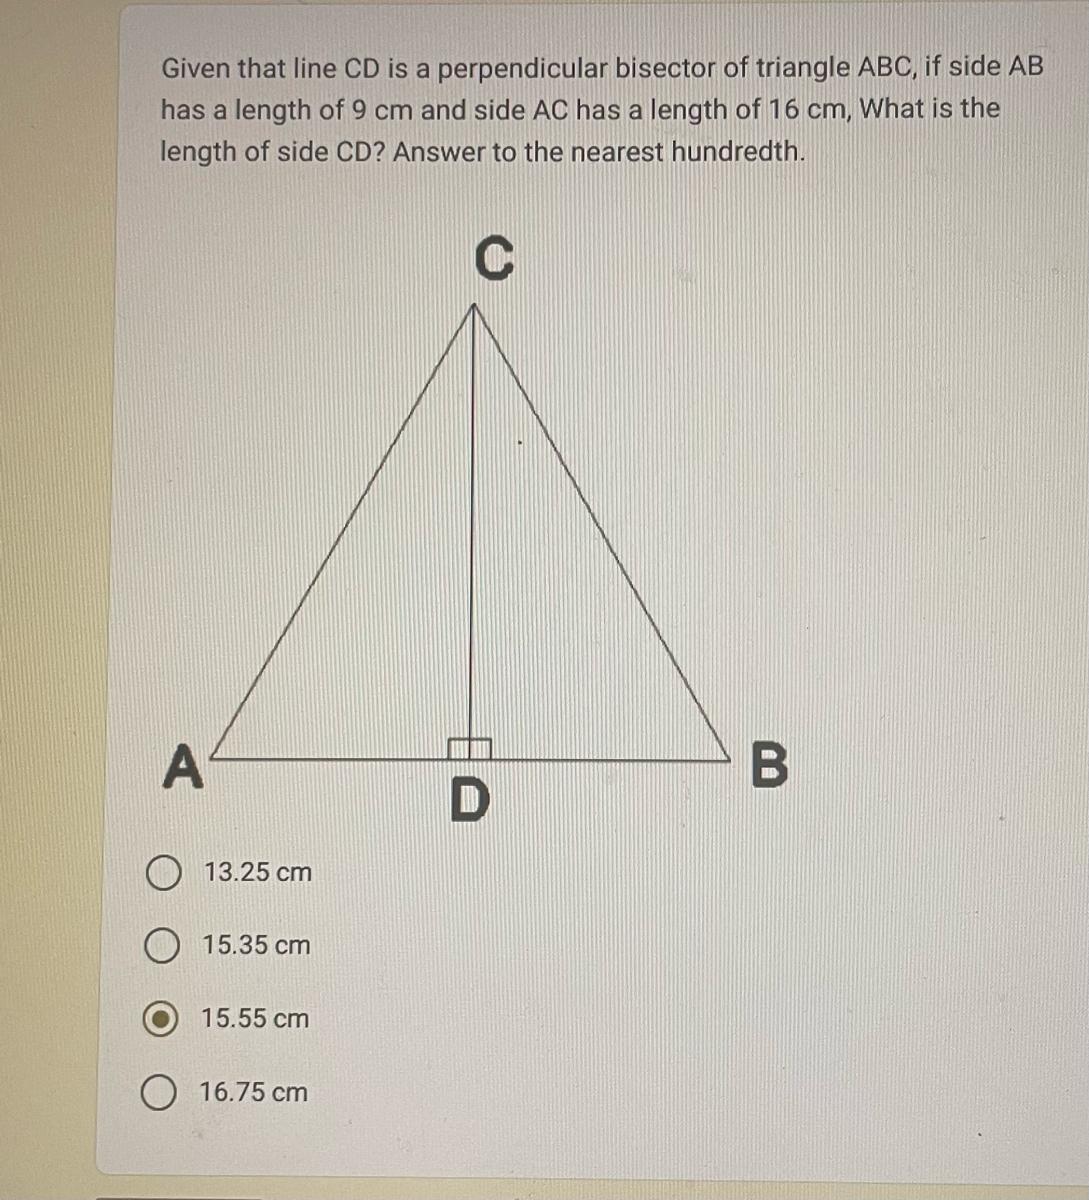 Given That Line Cd Is A Perpendicular Bisector Of Triangle Abc, If Side Ab Has A Length Of 9 Cm And Side